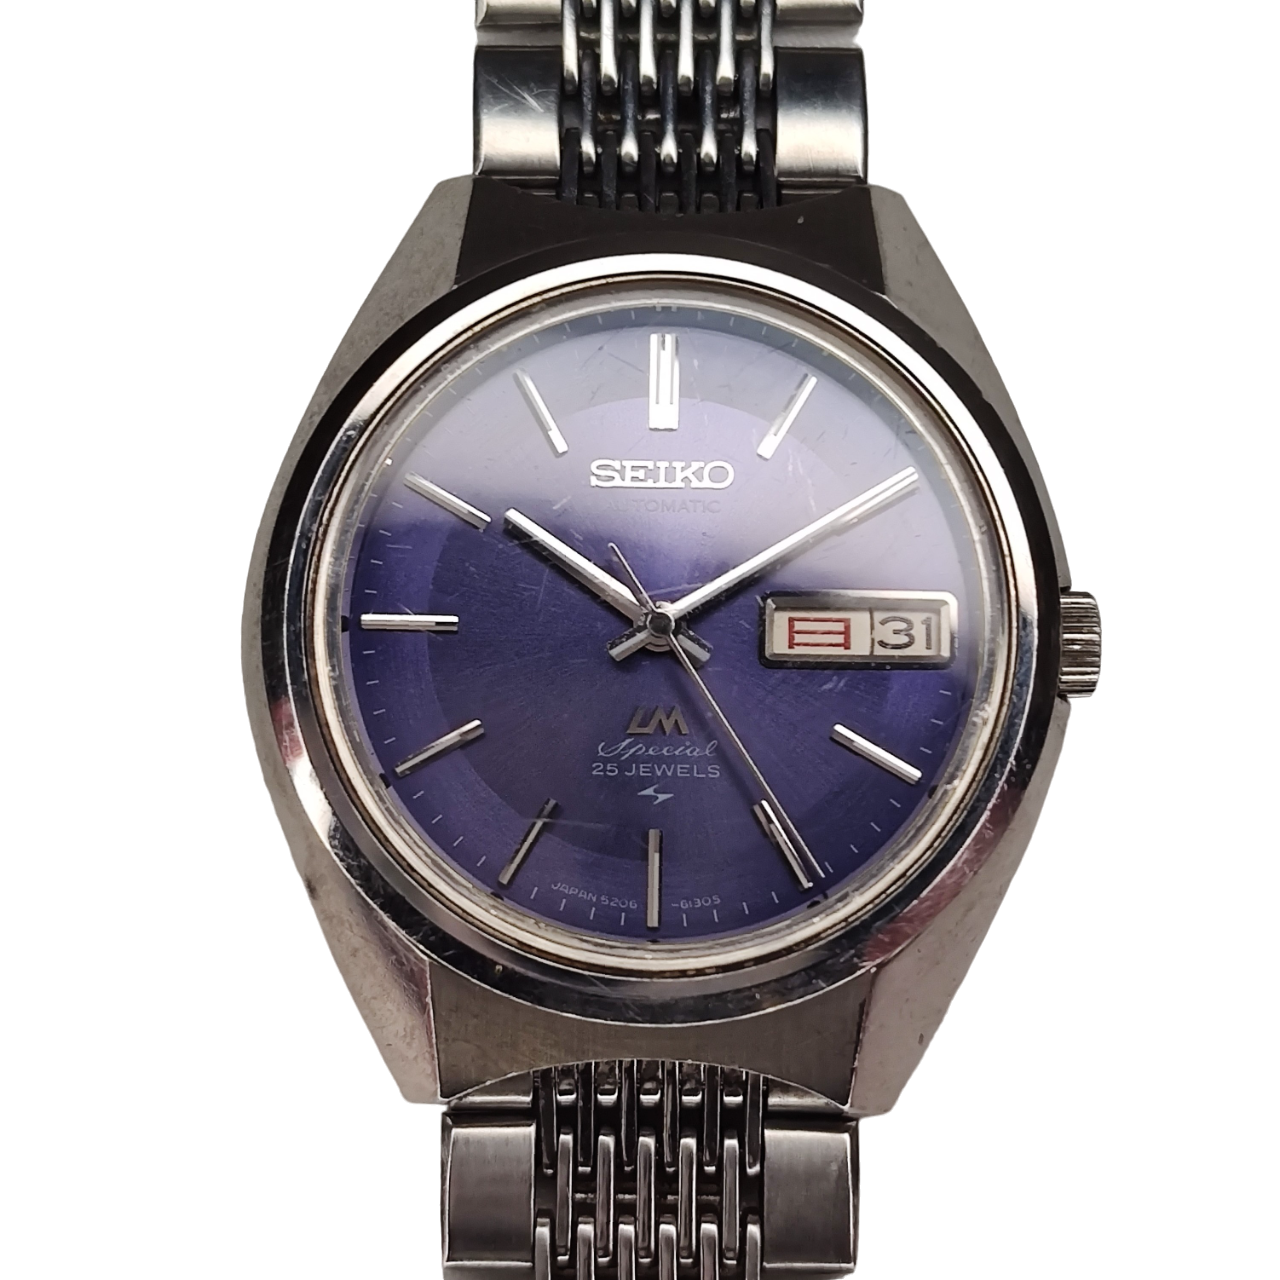 Seiko LordMatic LM Special Day Date 5206-6110 Circa 1972 – Temple of Time